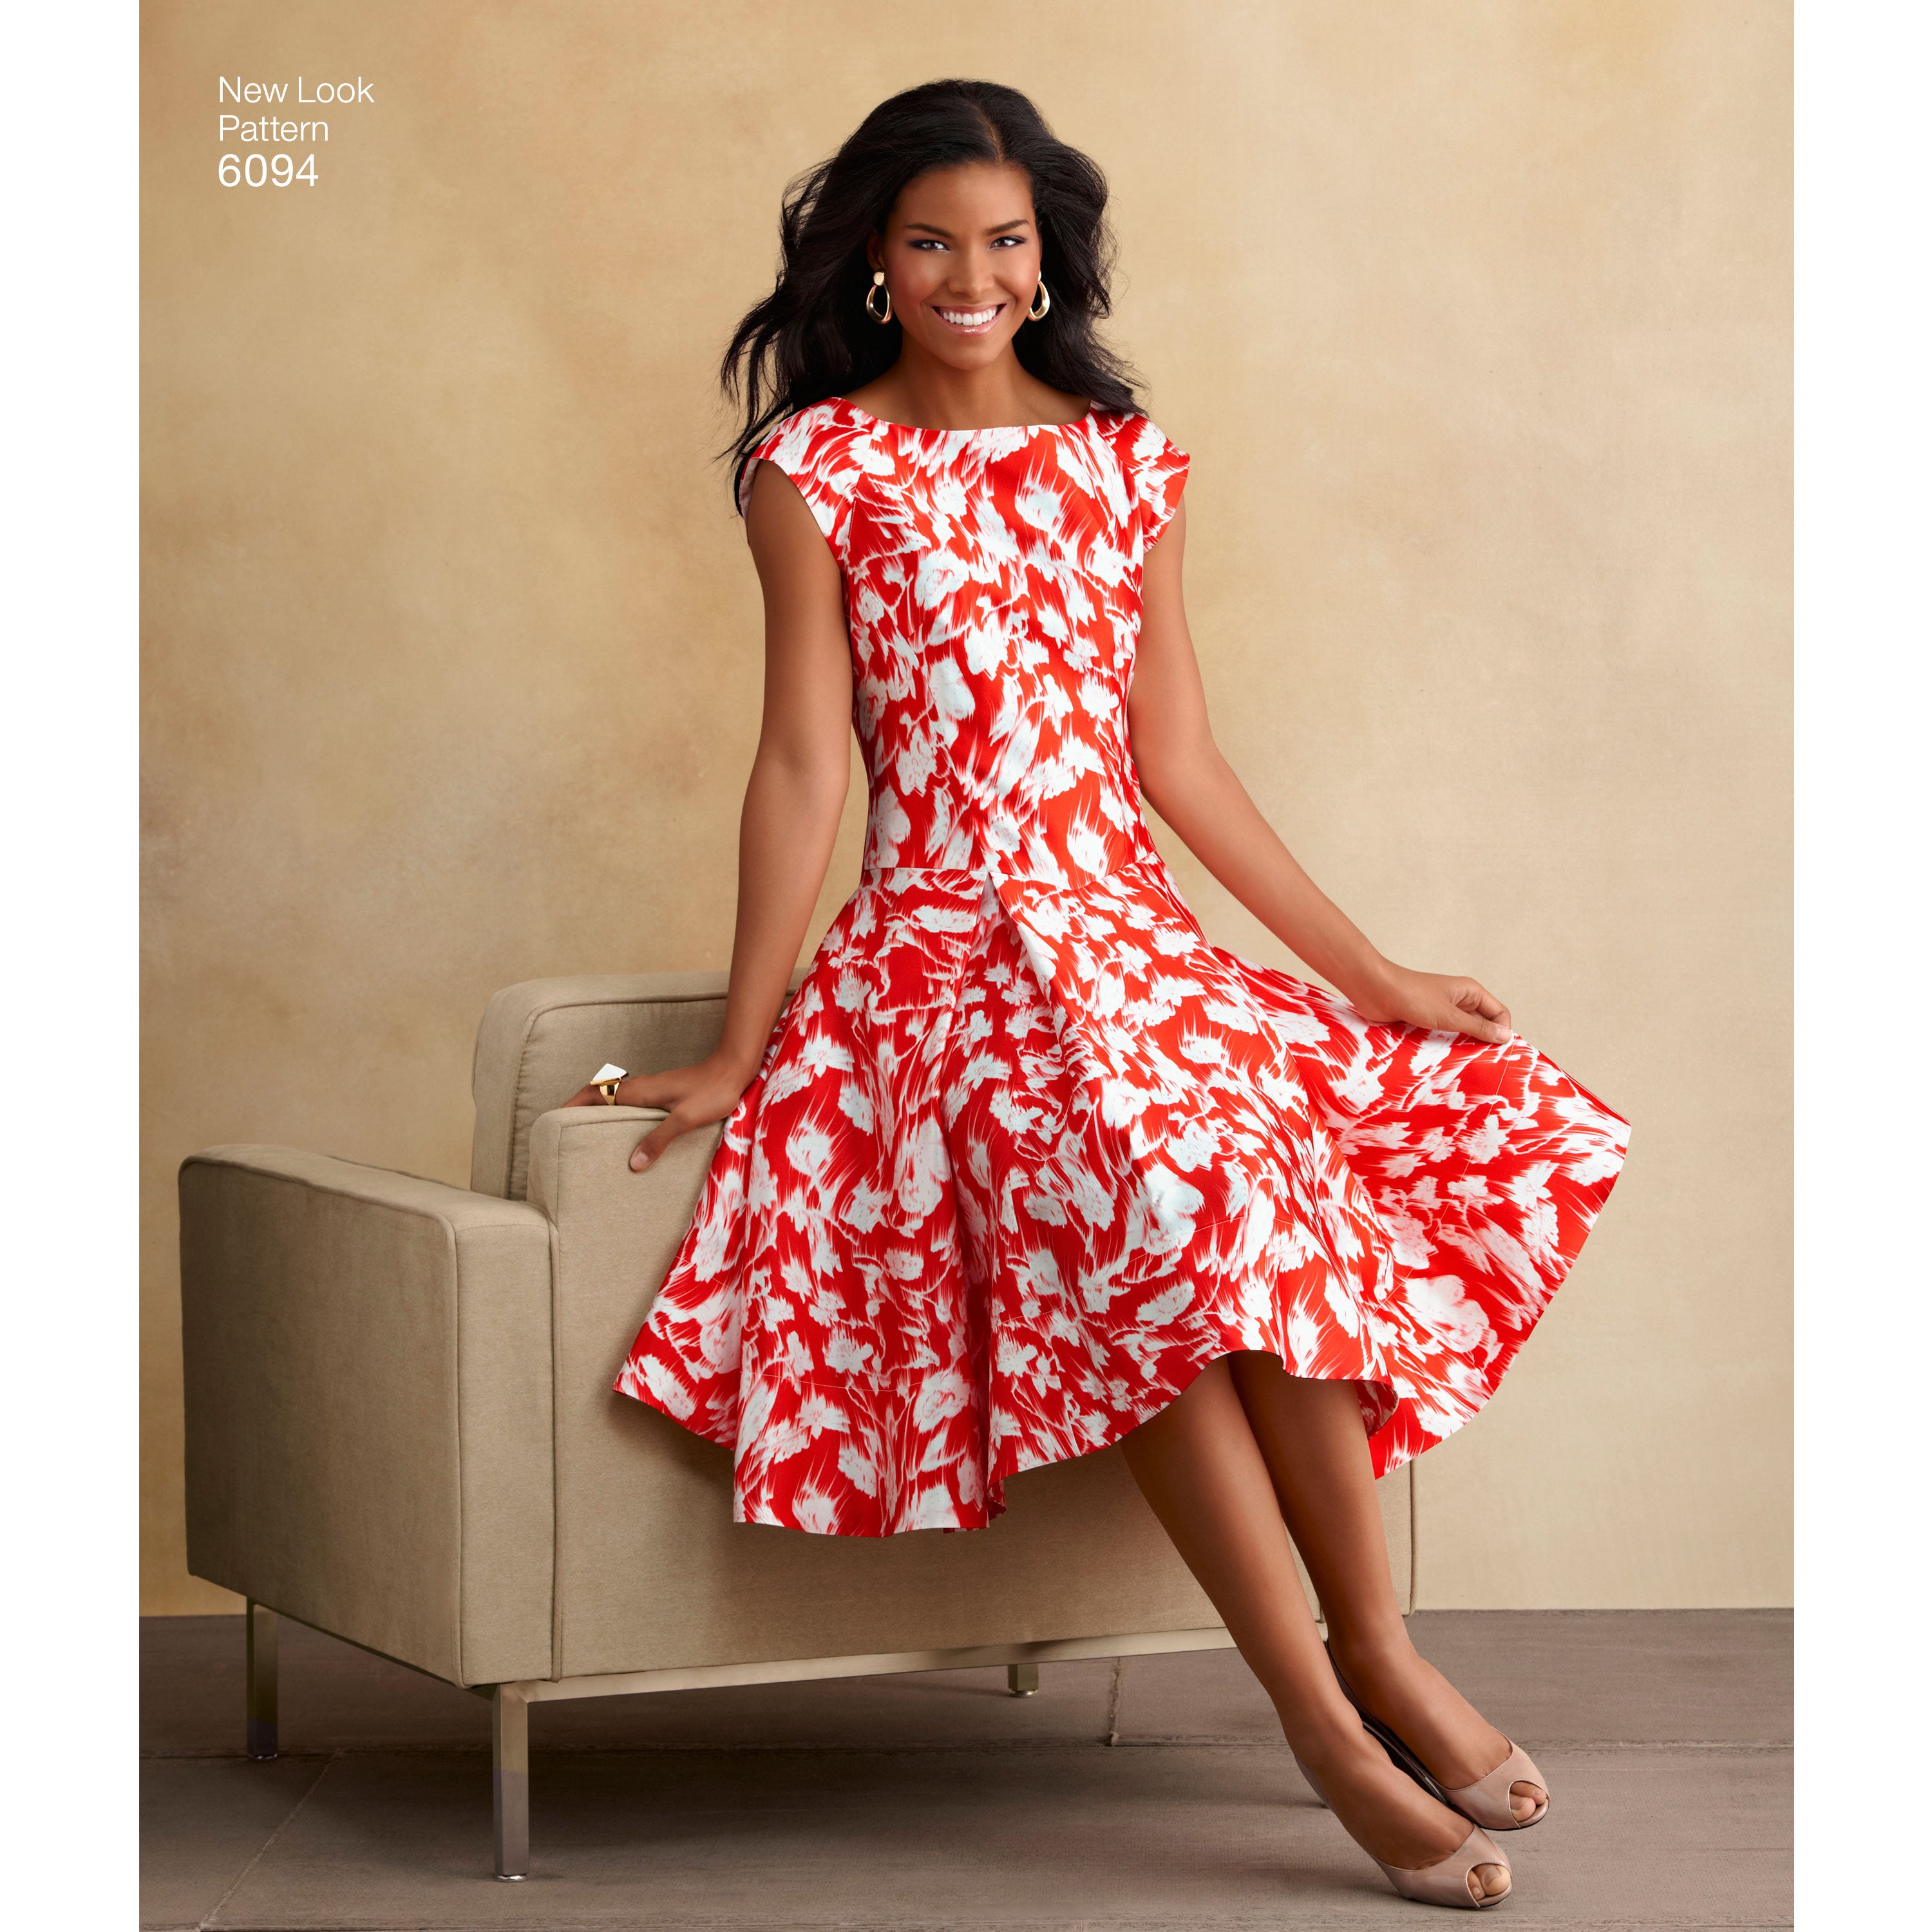 New Look Sewing Pattern 6094 Misses' Dresses Sewing Patterns My